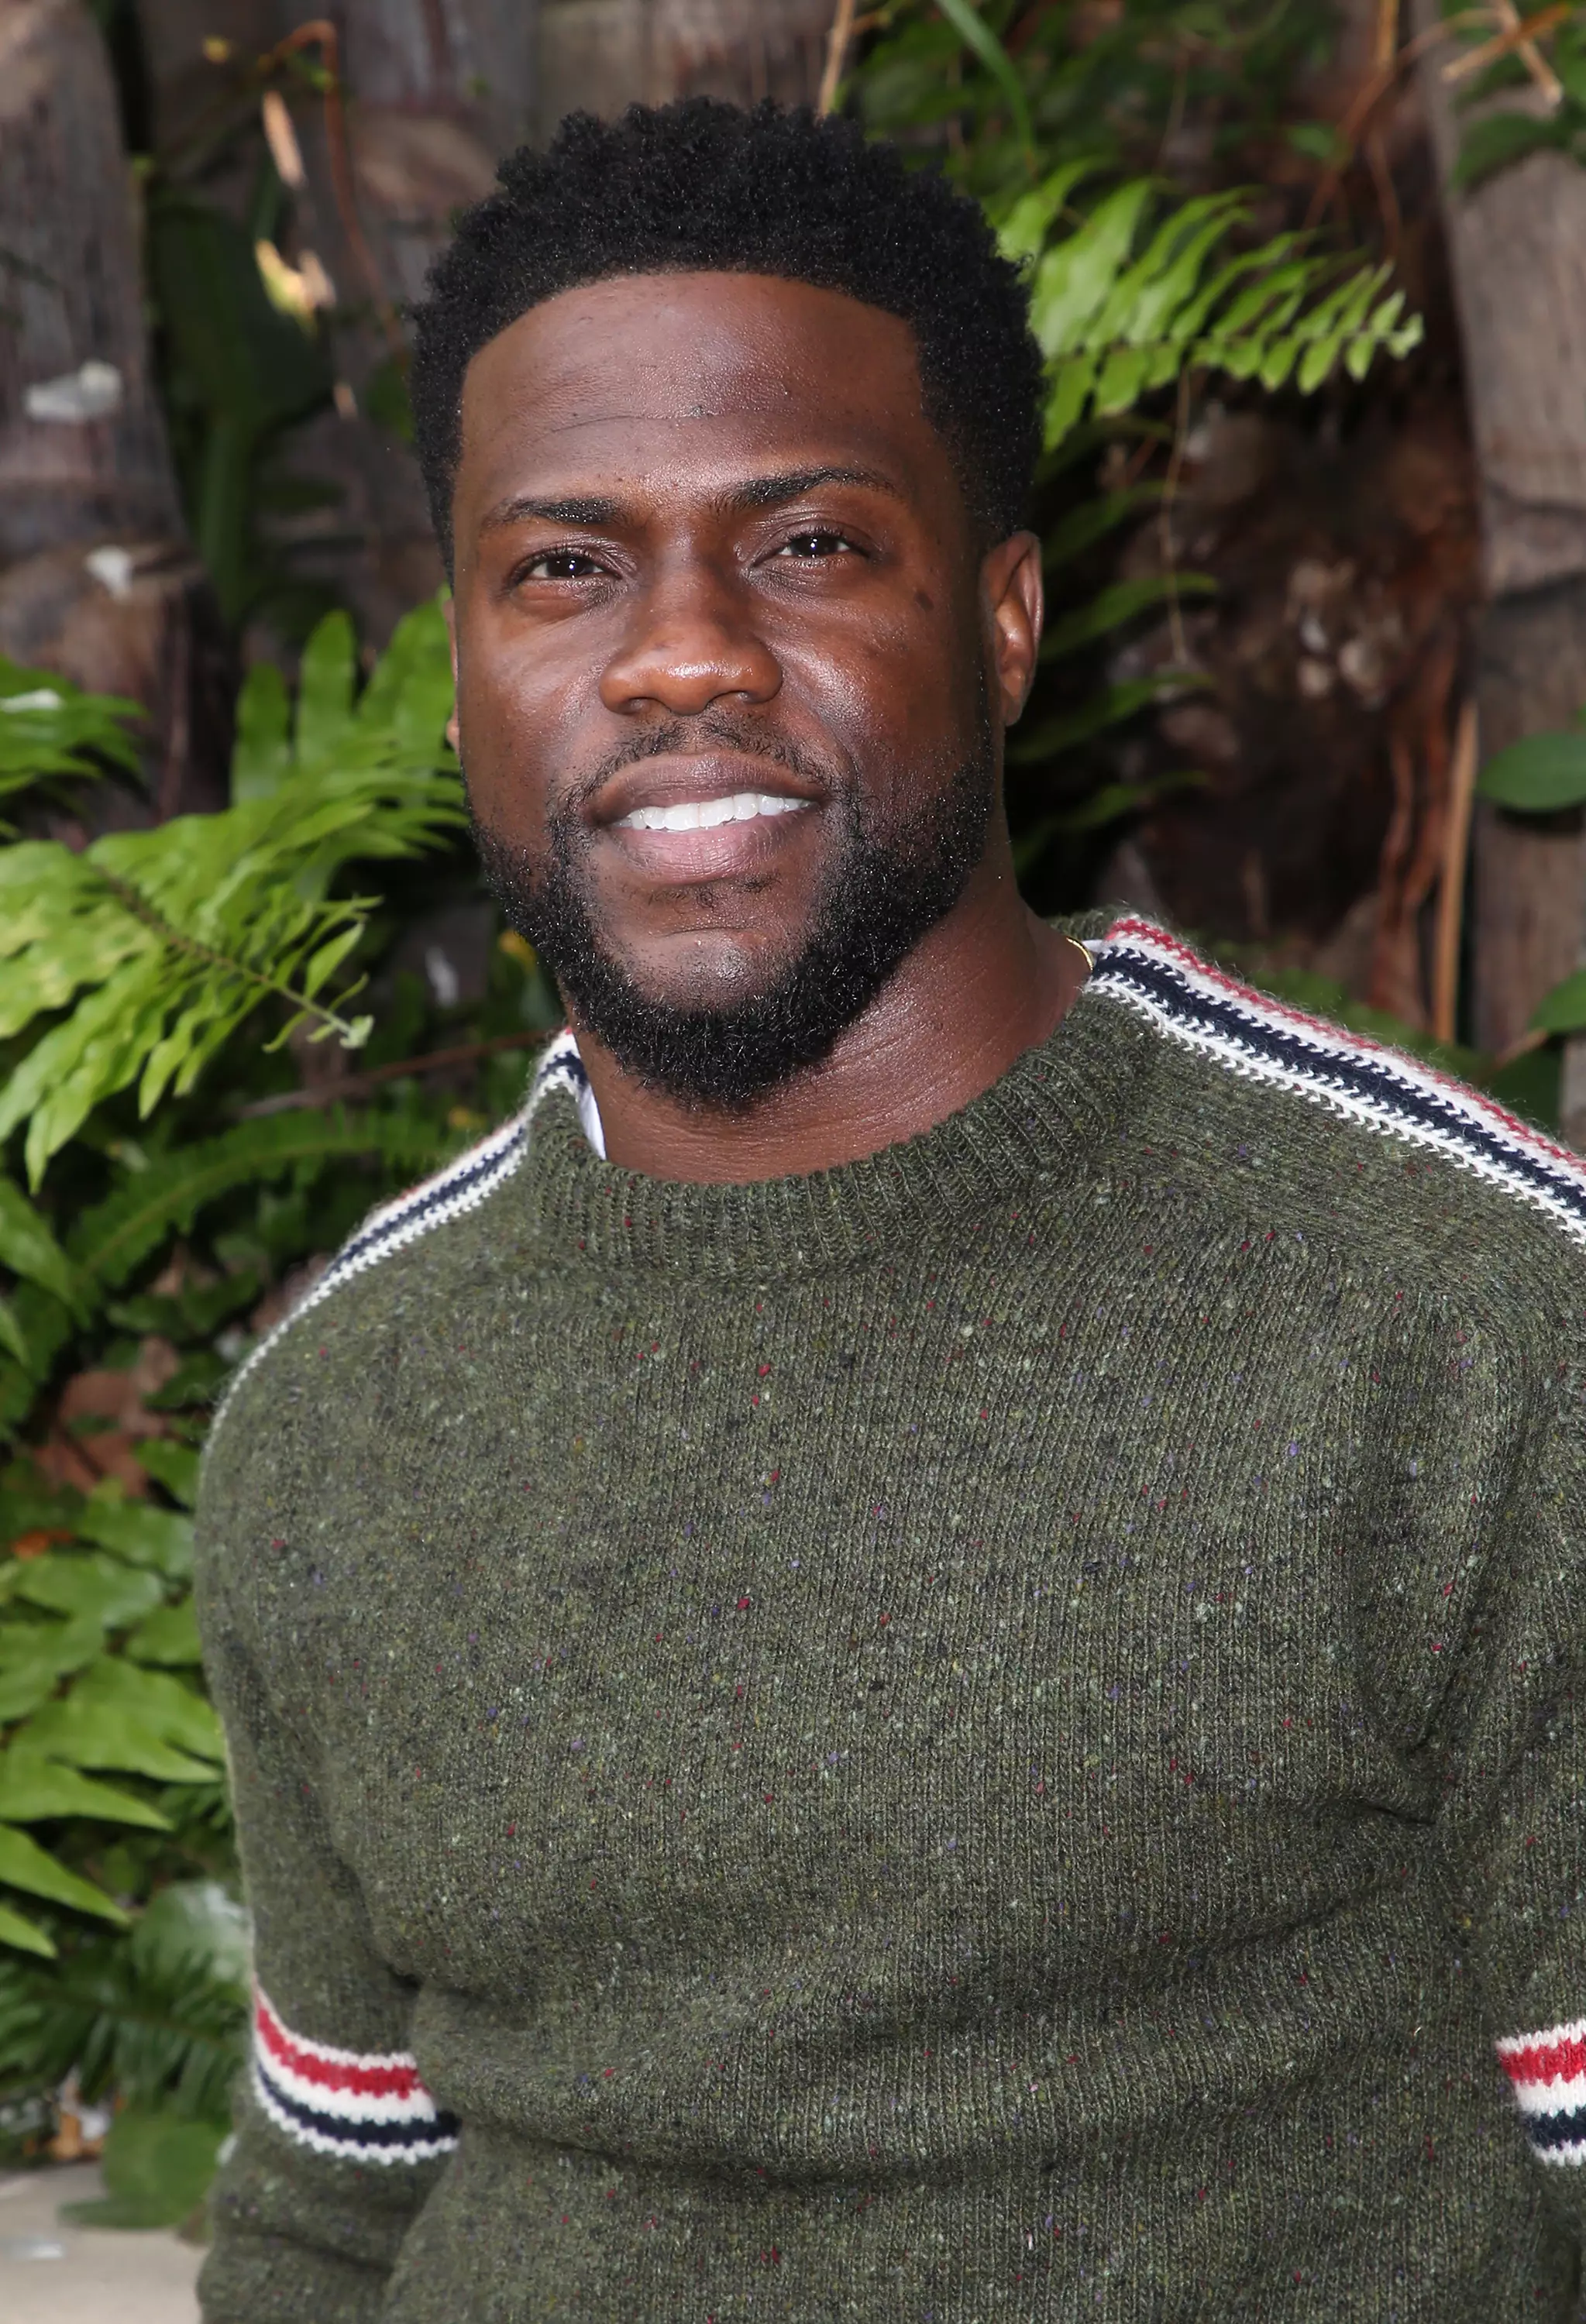 Kevin Hart stepped down from hosting the Oscars after homophobic tweets resurfaced.